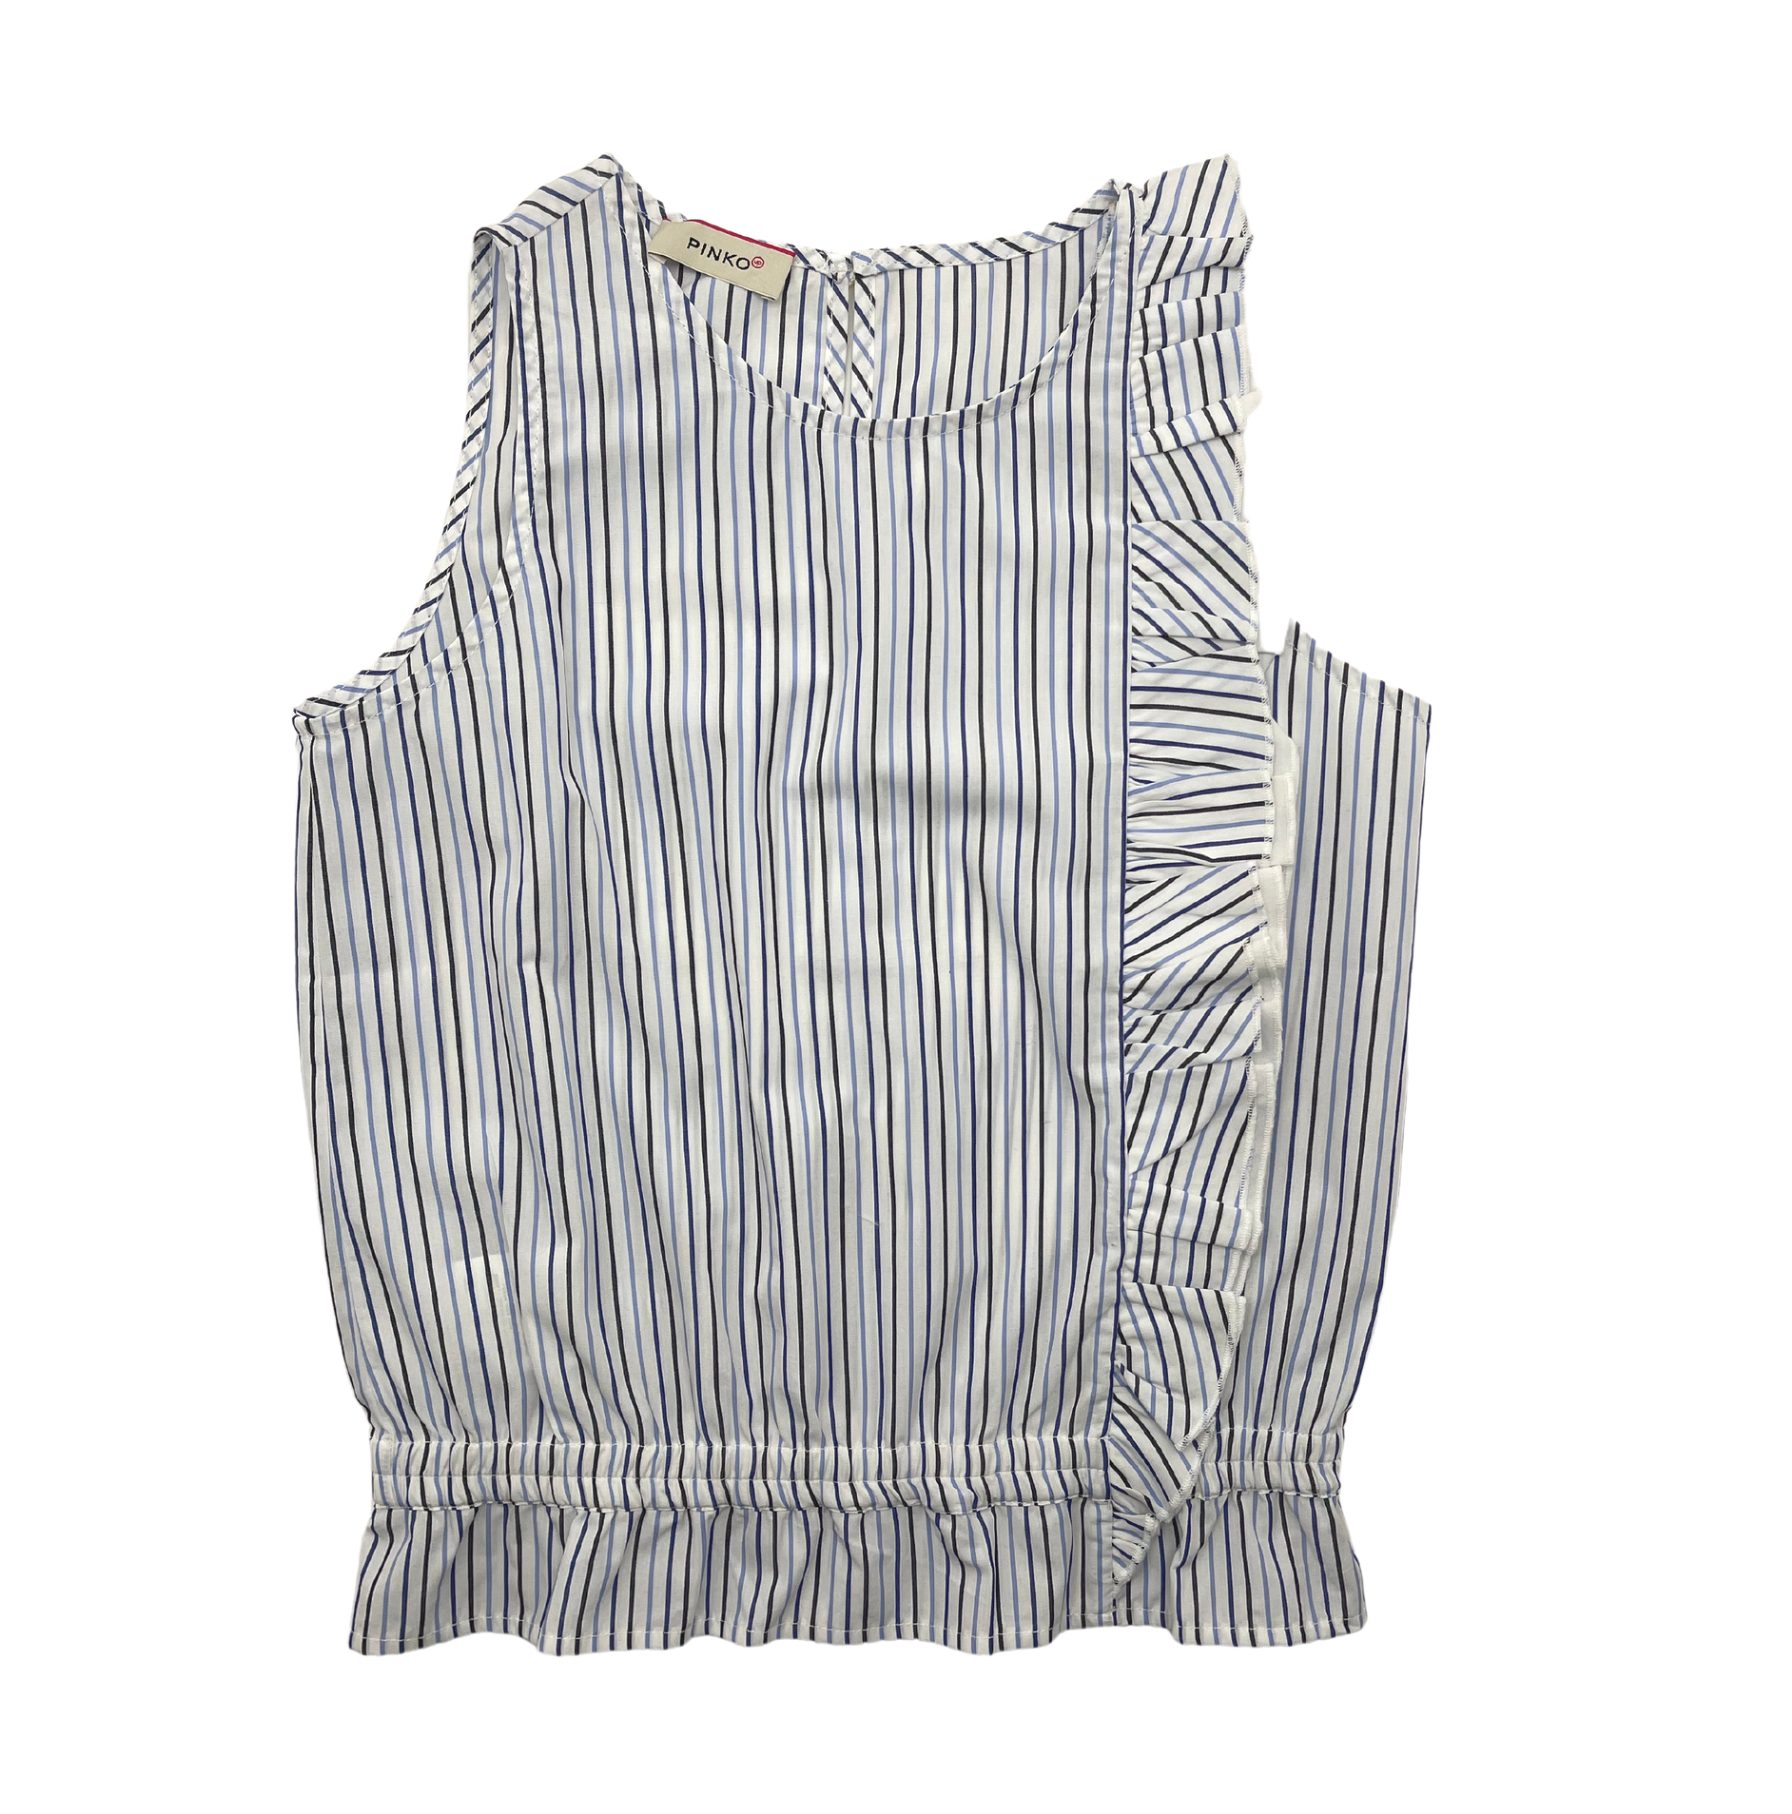 PINKO UP - Sky blue striped blouse without matting - 8 years (S)